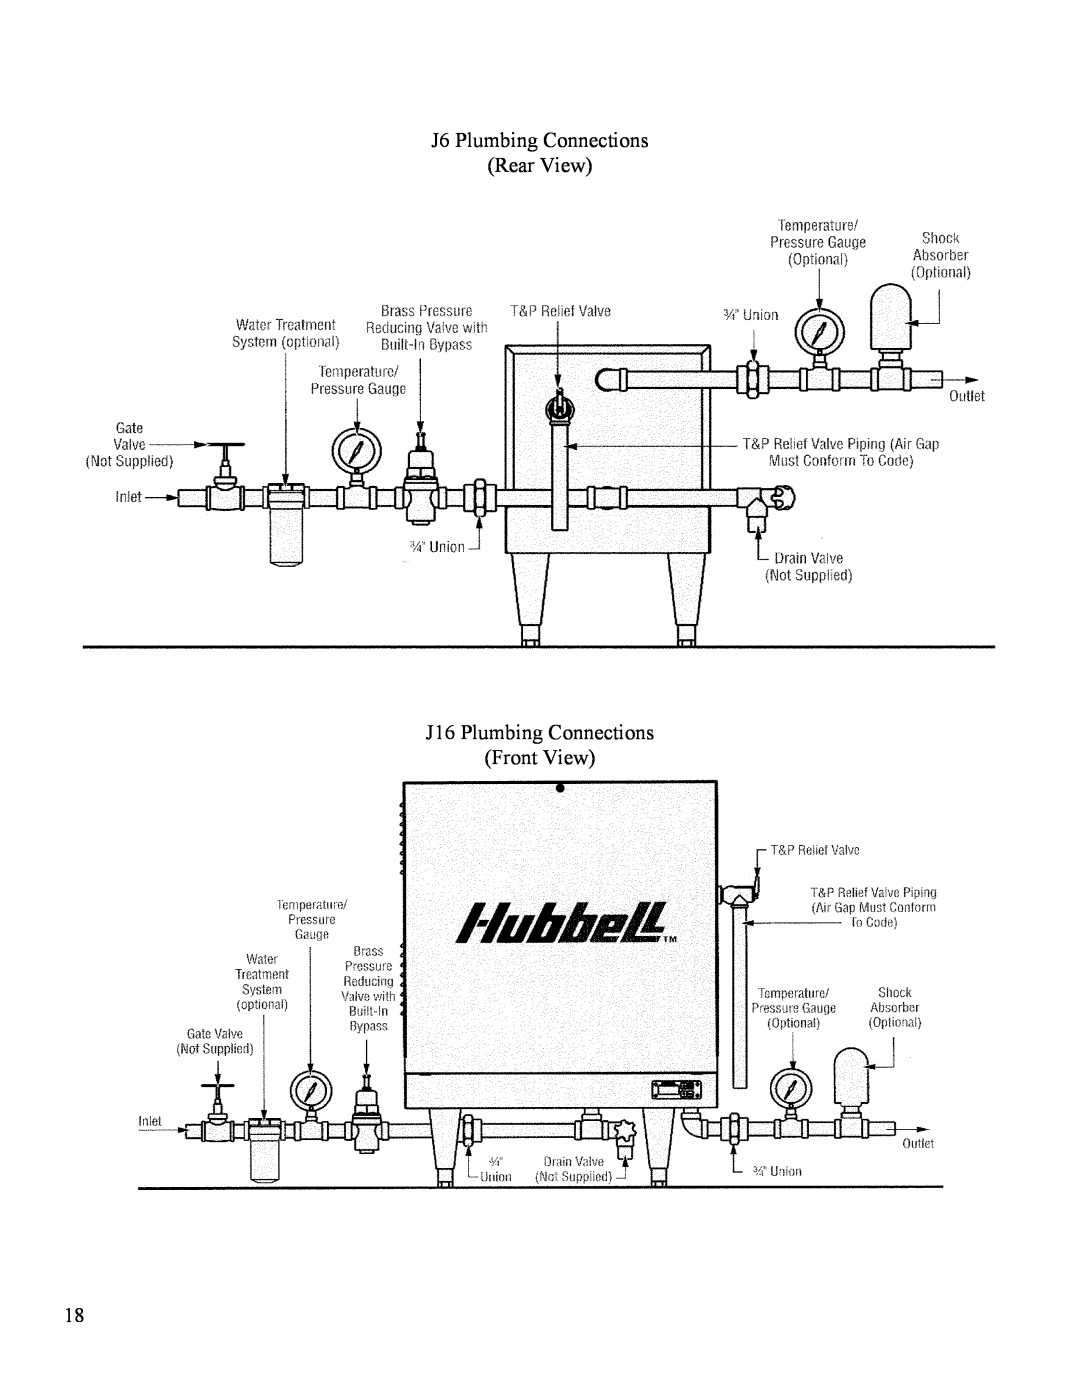 Hubbell Electric Heater Company manual J6 Plumbing Connections Rear View, J16 Plumbing Connections Front View 